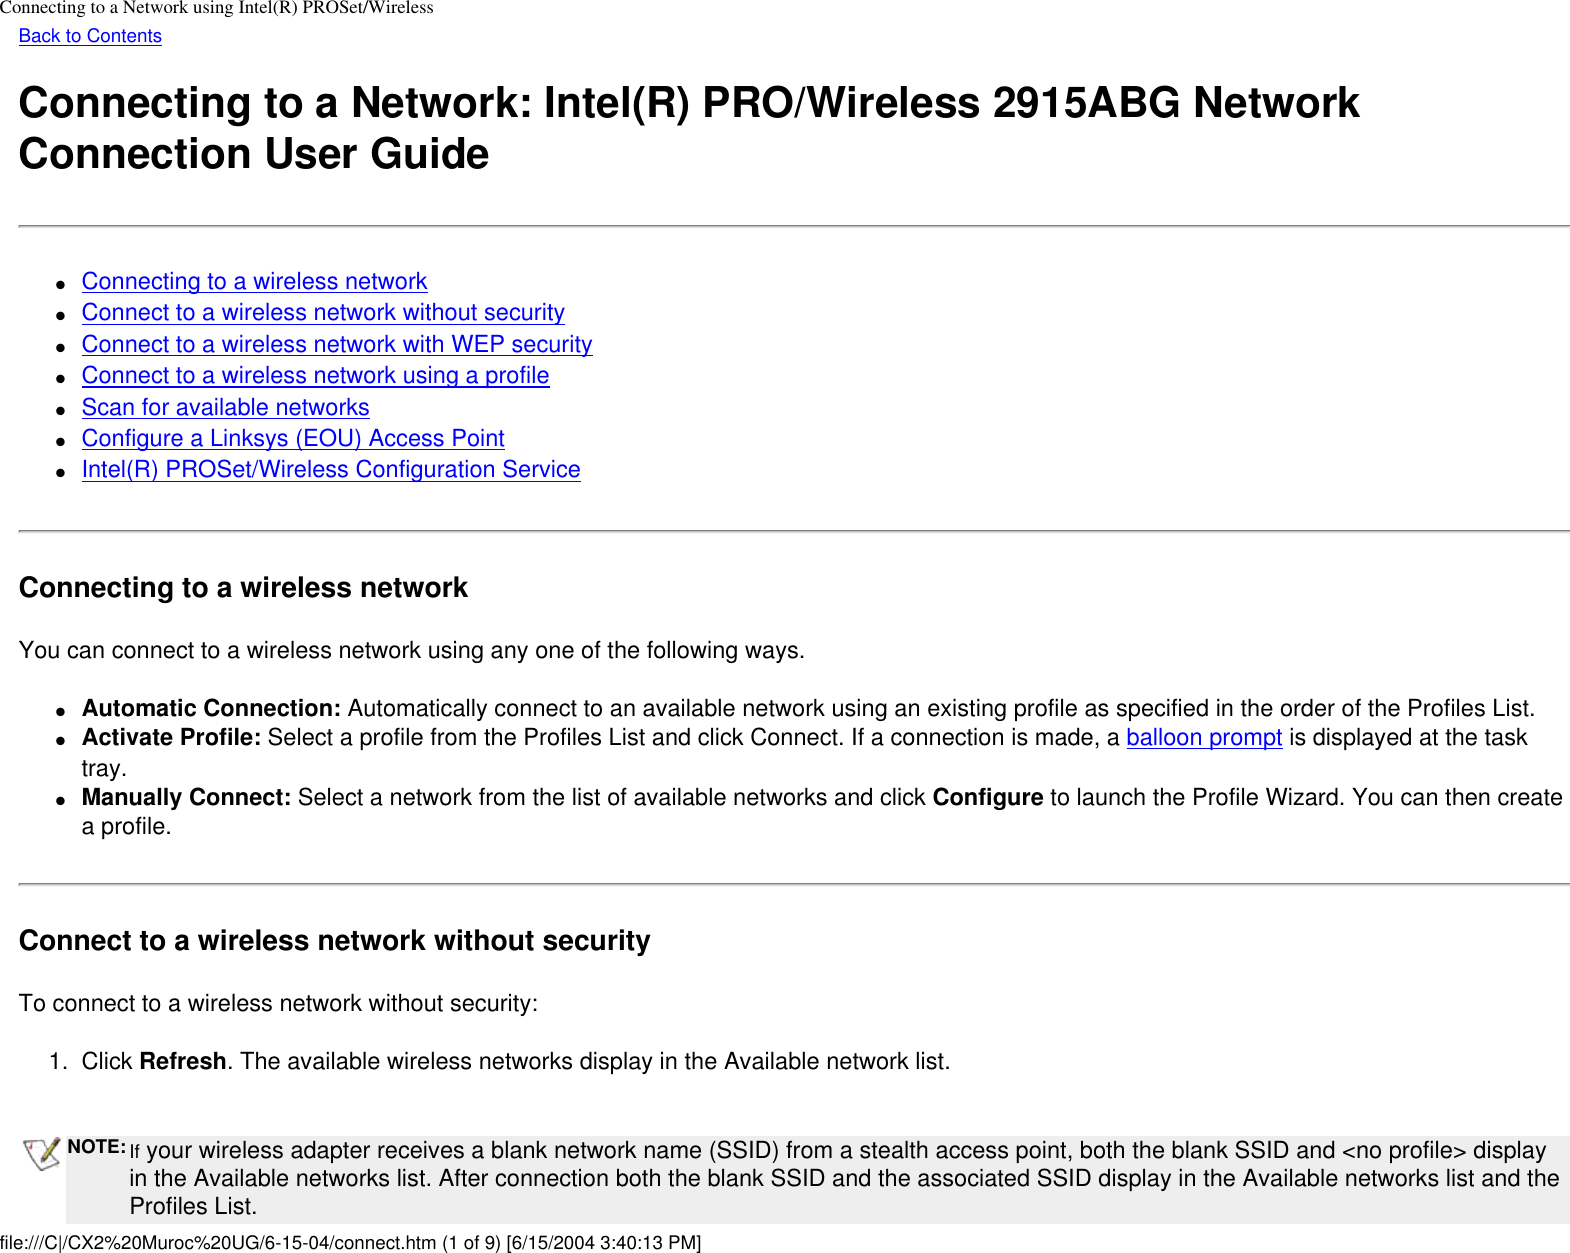 Connecting to a Network using Intel(R) PROSet/WirelessBack to ContentsConnecting to a Network: Intel(R) PRO/Wireless 2915ABG Network Connection User Guide●     Connecting to a wireless network●     Connect to a wireless network without security●     Connect to a wireless network with WEP security●     Connect to a wireless network using a profile●     Scan for available networks●     Configure a Linksys (EOU) Access Point●     Intel(R) PROSet/Wireless Configuration ServiceConnecting to a wireless networkYou can connect to a wireless network using any one of the following ways.●     Automatic Connection: Automatically connect to an available network using an existing profile as specified in the order of the Profiles List. ●     Activate Profile: Select a profile from the Profiles List and click Connect. If a connection is made, a balloon prompt is displayed at the task tray.●     Manually Connect: Select a network from the list of available networks and click Configure to launch the Profile Wizard. You can then create a profile.Connect to a wireless network without securityTo connect to a wireless network without security:1.  Click Refresh. The available wireless networks display in the Available network list. NOTE: If your wireless adapter receives a blank network name (SSID) from a stealth access point, both the blank SSID and &lt;no profile&gt; display in the Available networks list. After connection both the blank SSID and the associated SSID display in the Available networks list and the Profiles List.file:///C|/CX2%20Muroc%20UG/6-15-04/connect.htm (1 of 9) [6/15/2004 3:40:13 PM]